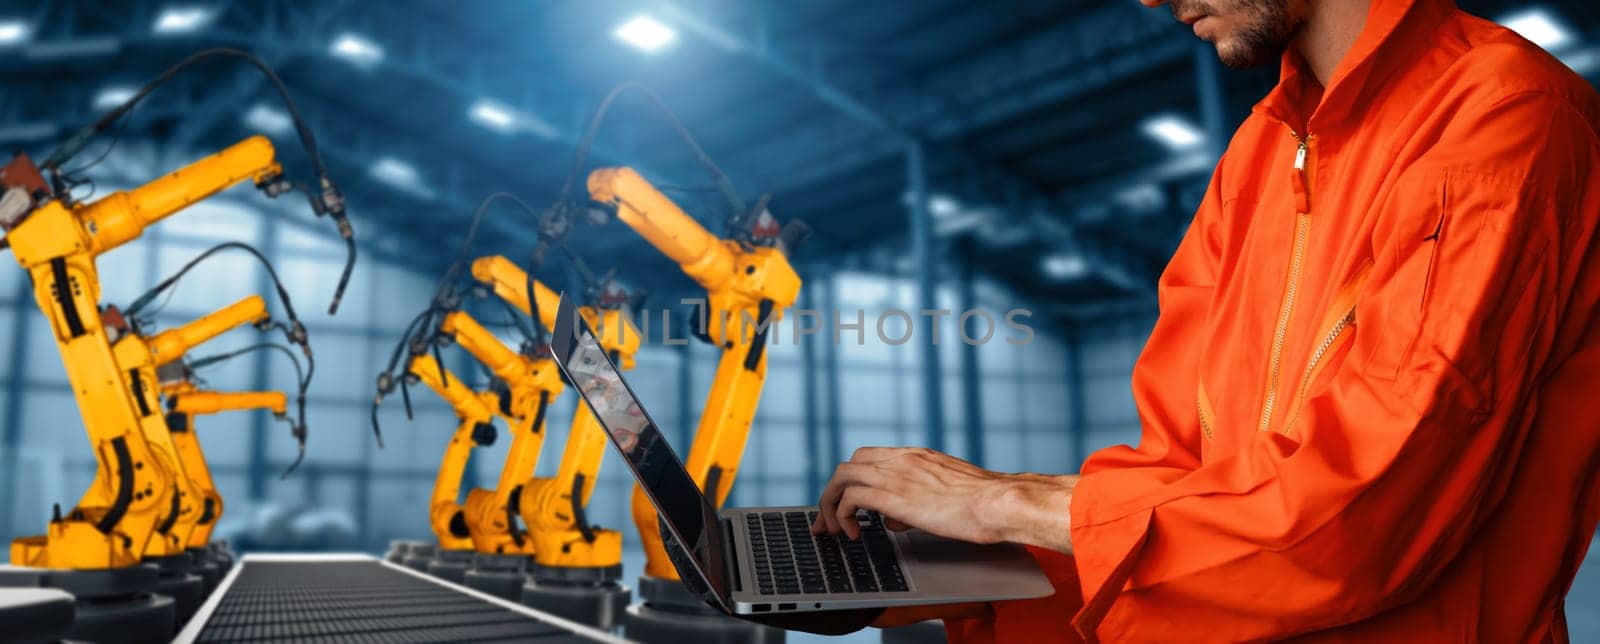 MLP Engineer use advanced robotic software to control industry robot arm in factory by biancoblue